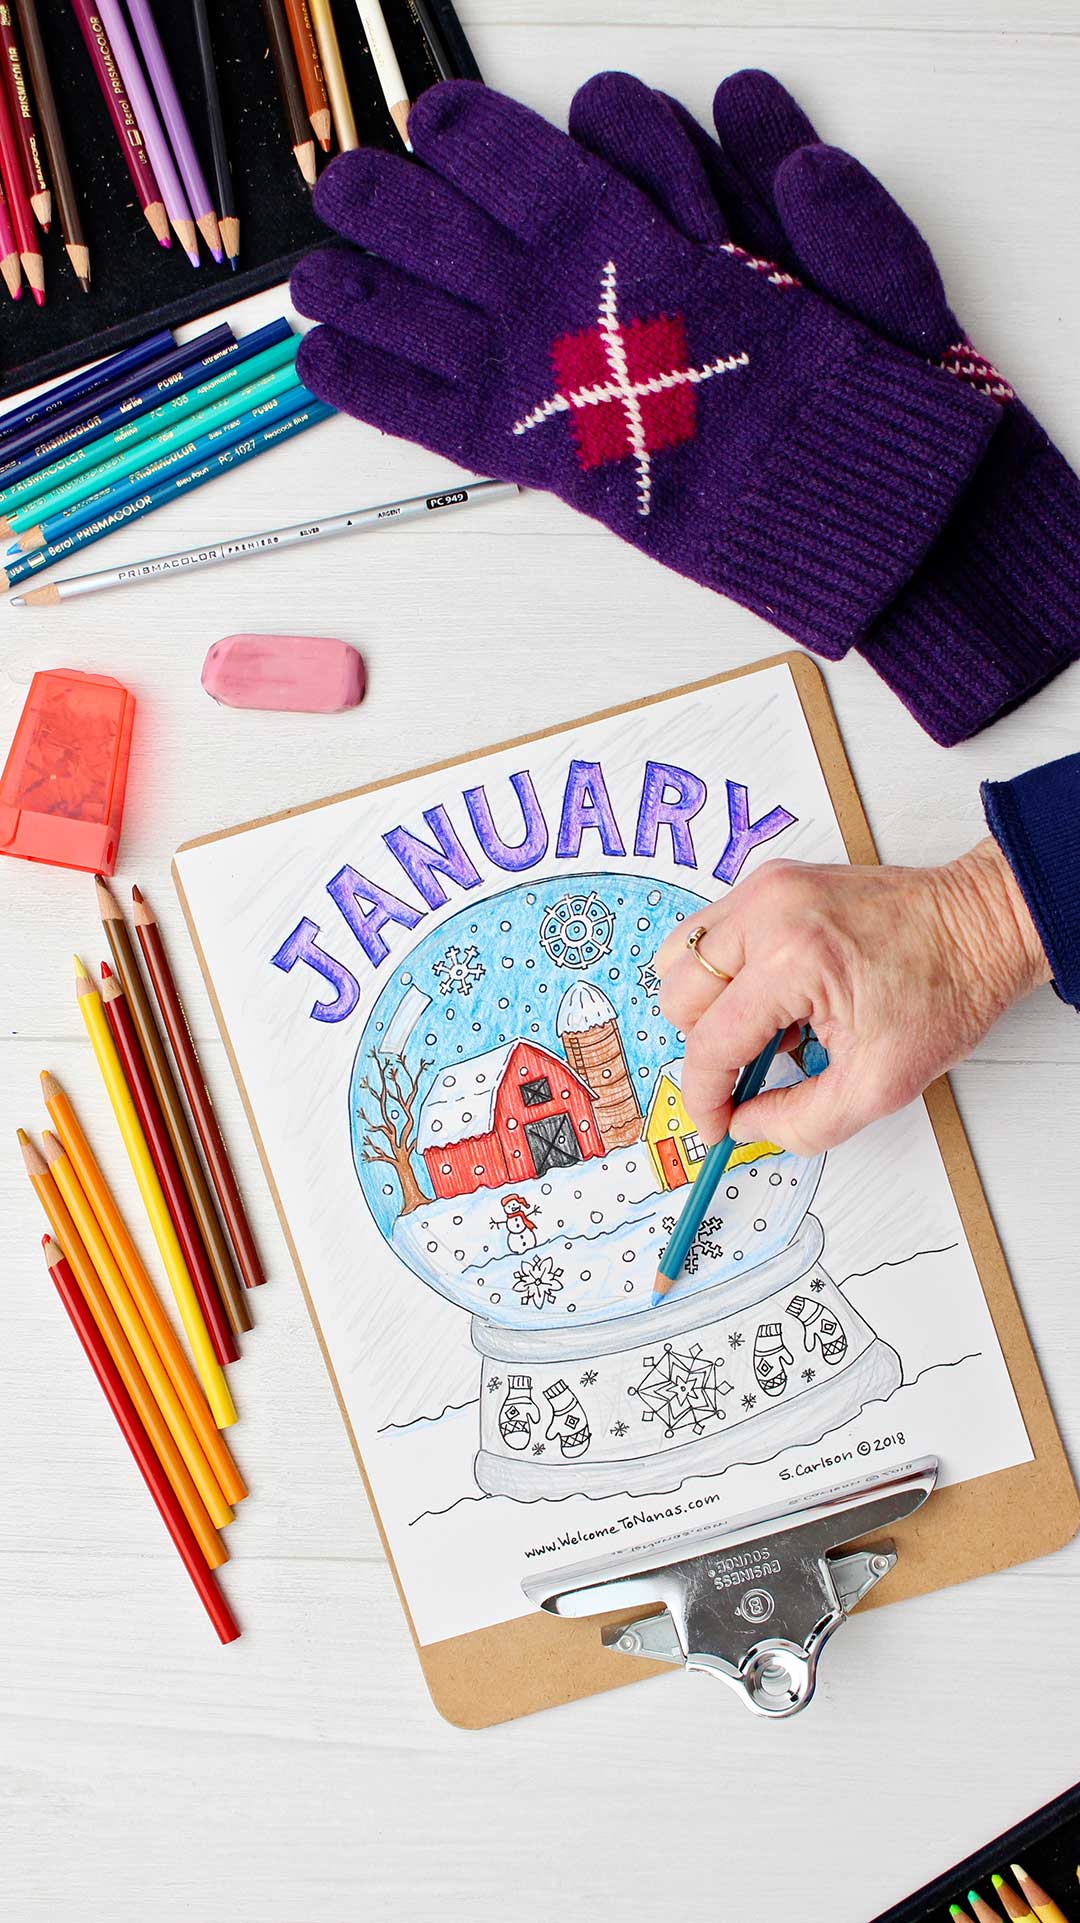 Hand shading in snow on the January coloring page on clipboard surrounded by colored pencils and purple gloves.